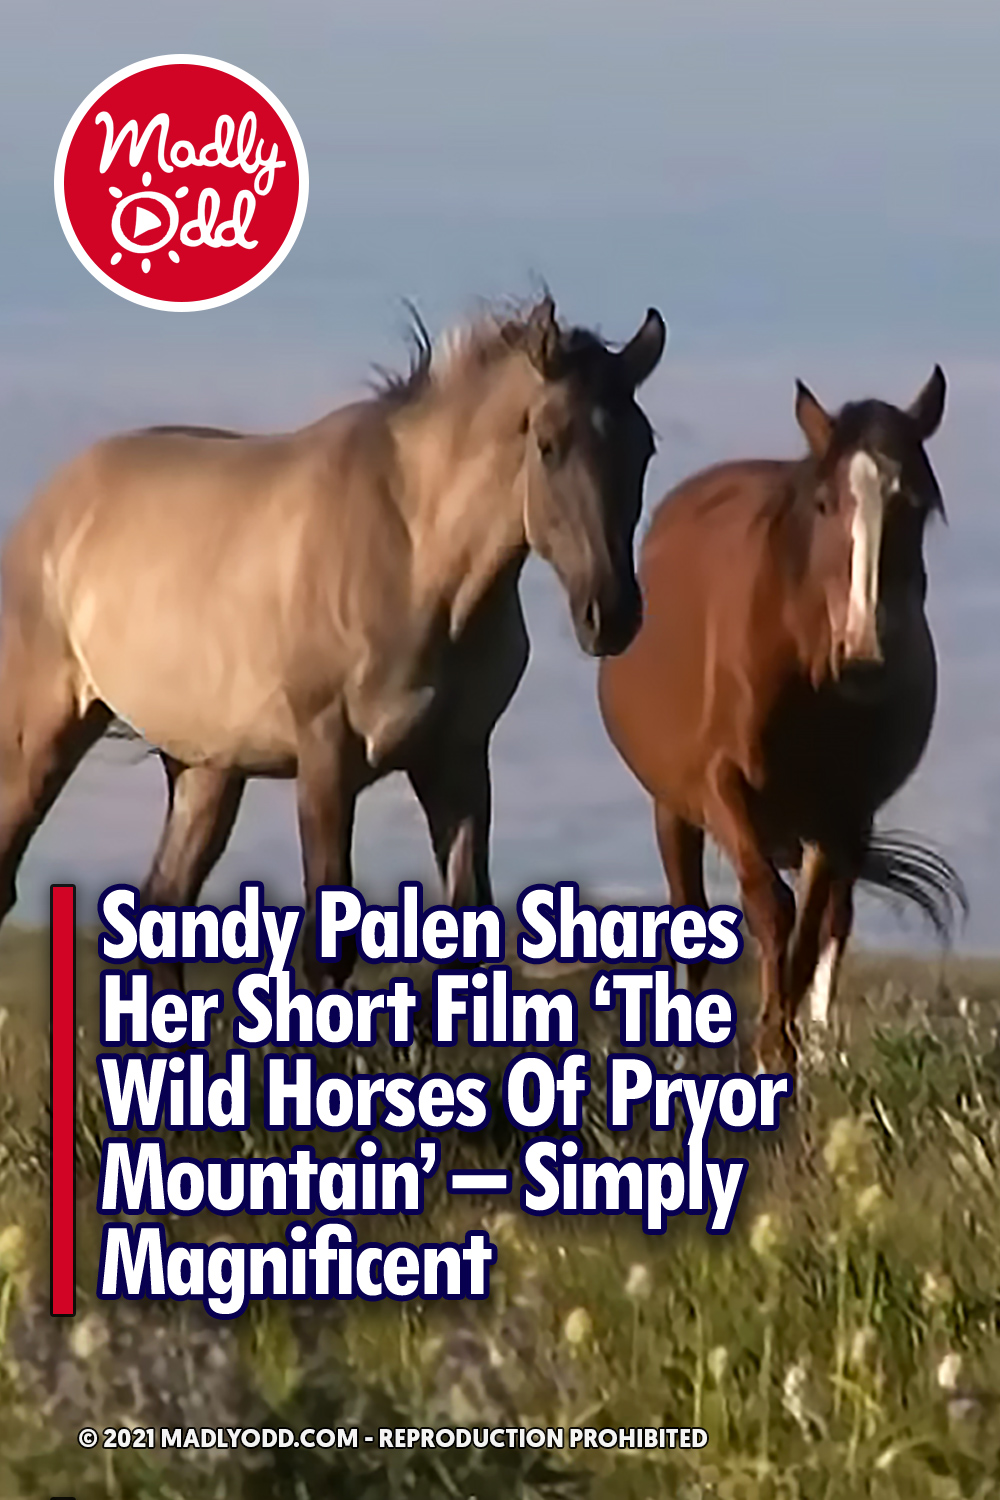 Sandy Palen Shares Her Short Film \'The Wild Horses Of Pryor Mountain\' – Simply Magnificent